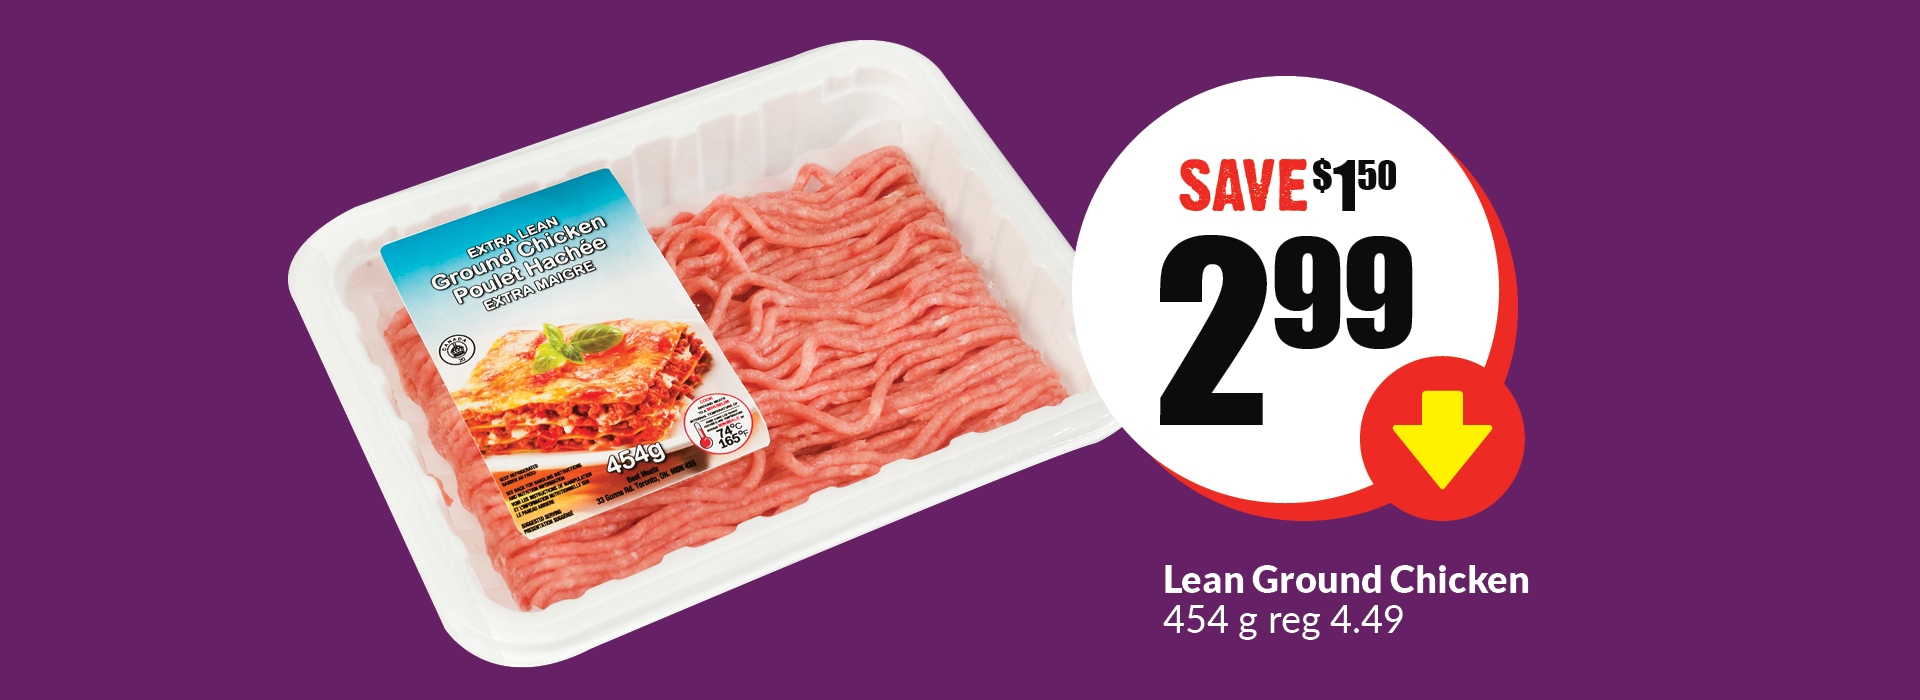 The following image contains the text, "Lean ground Chicken 454g reg 4.49. Get them at $2.99 and save $1.50.